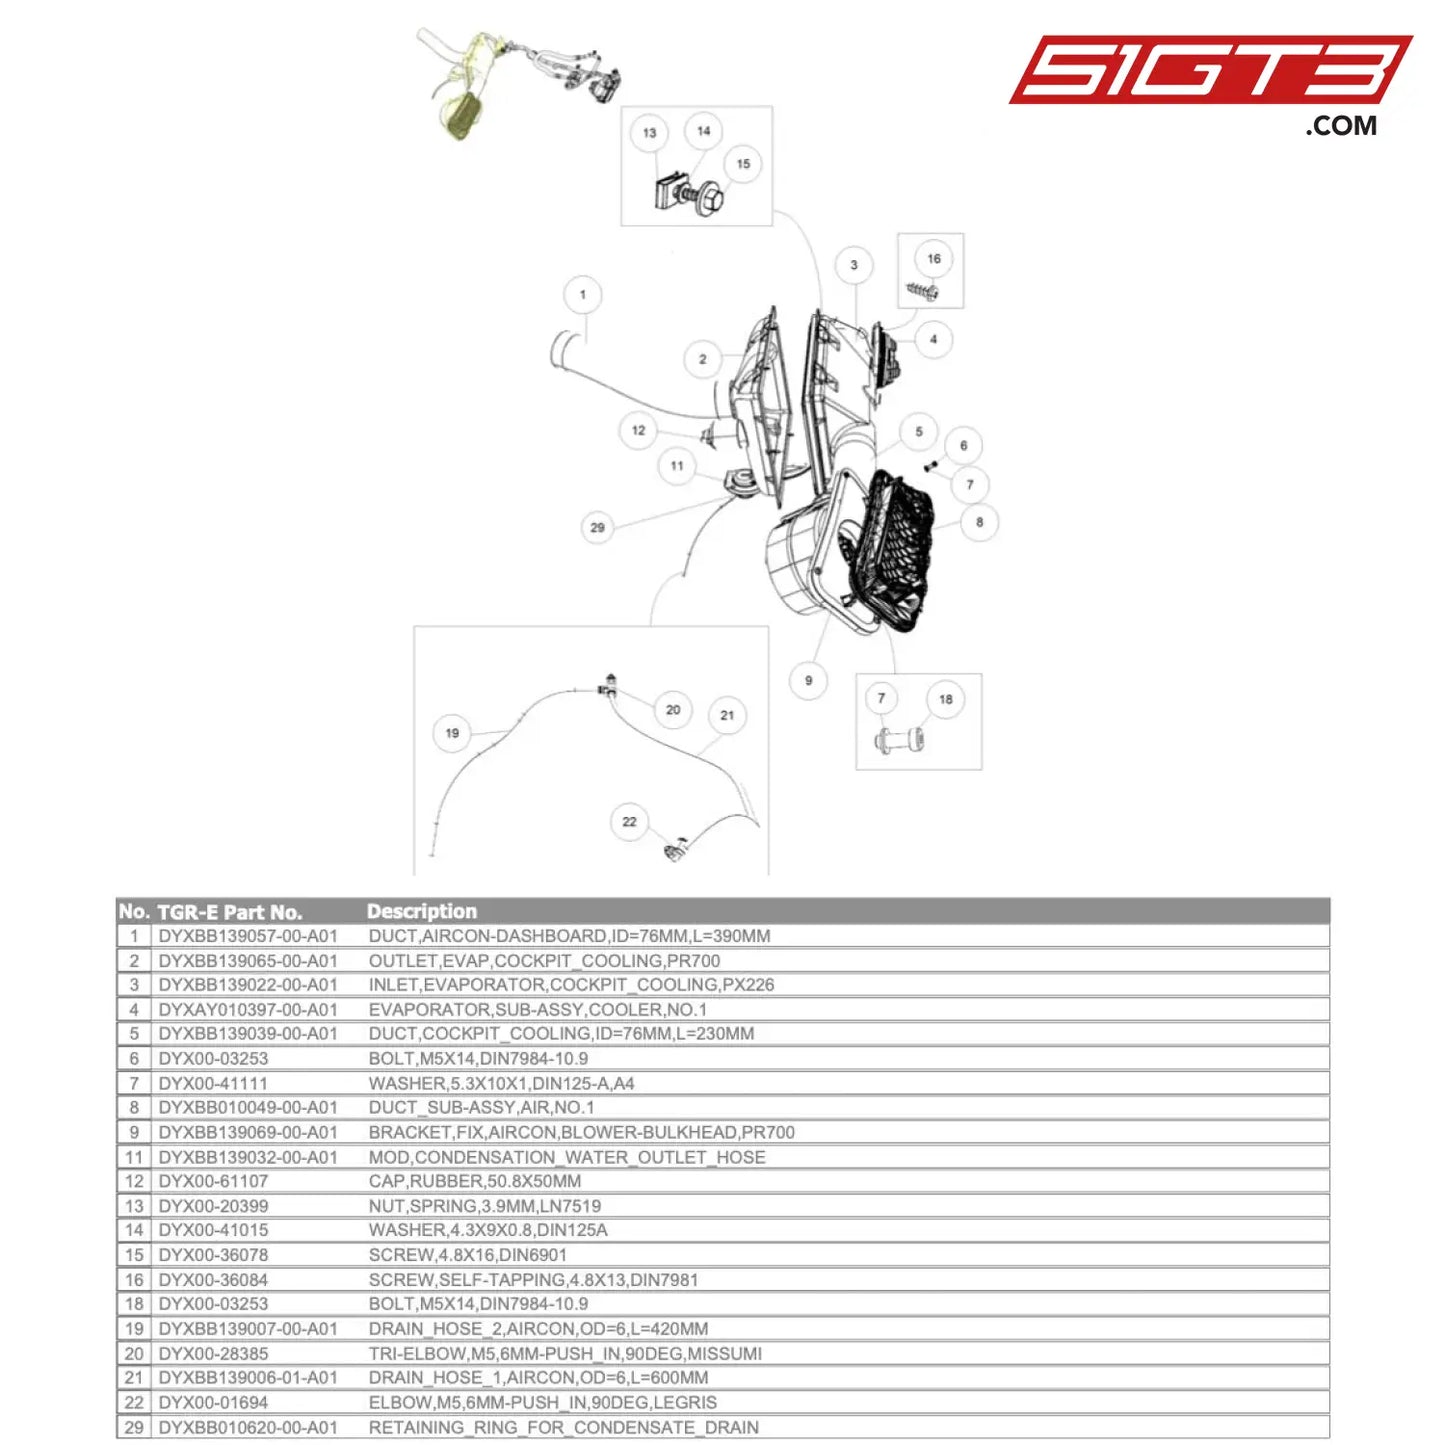 Retaining_Ring_For_Condensate_Drain Gt4 Evo - Dyxbb010620-00-A01 [Gr Supra Evo] Cockpit Cooling 1